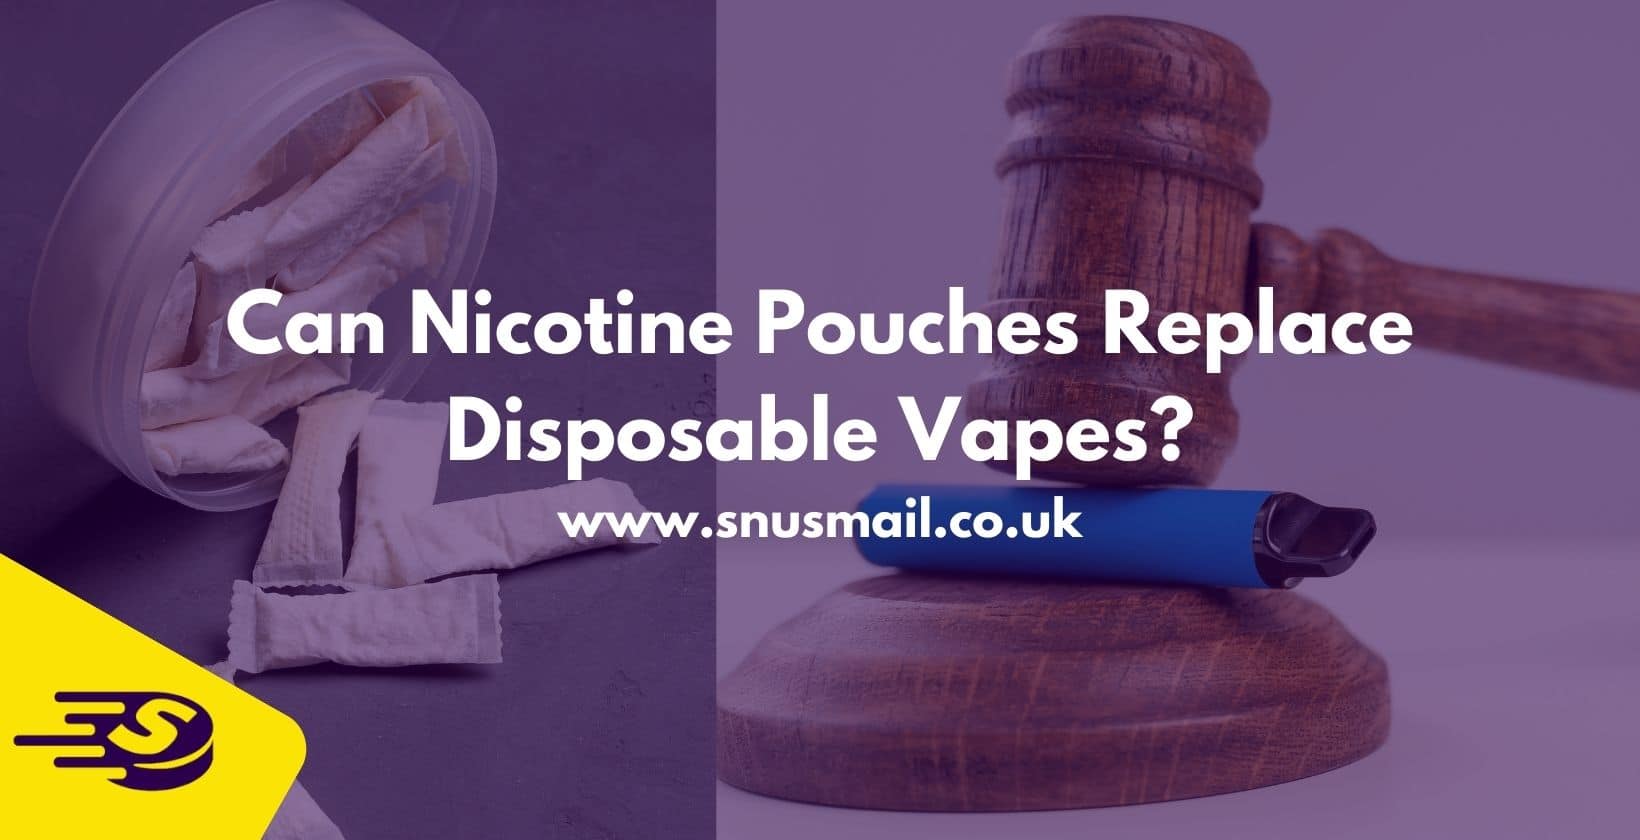 Nicotine Pouches Are Better Than Disposable Vapes